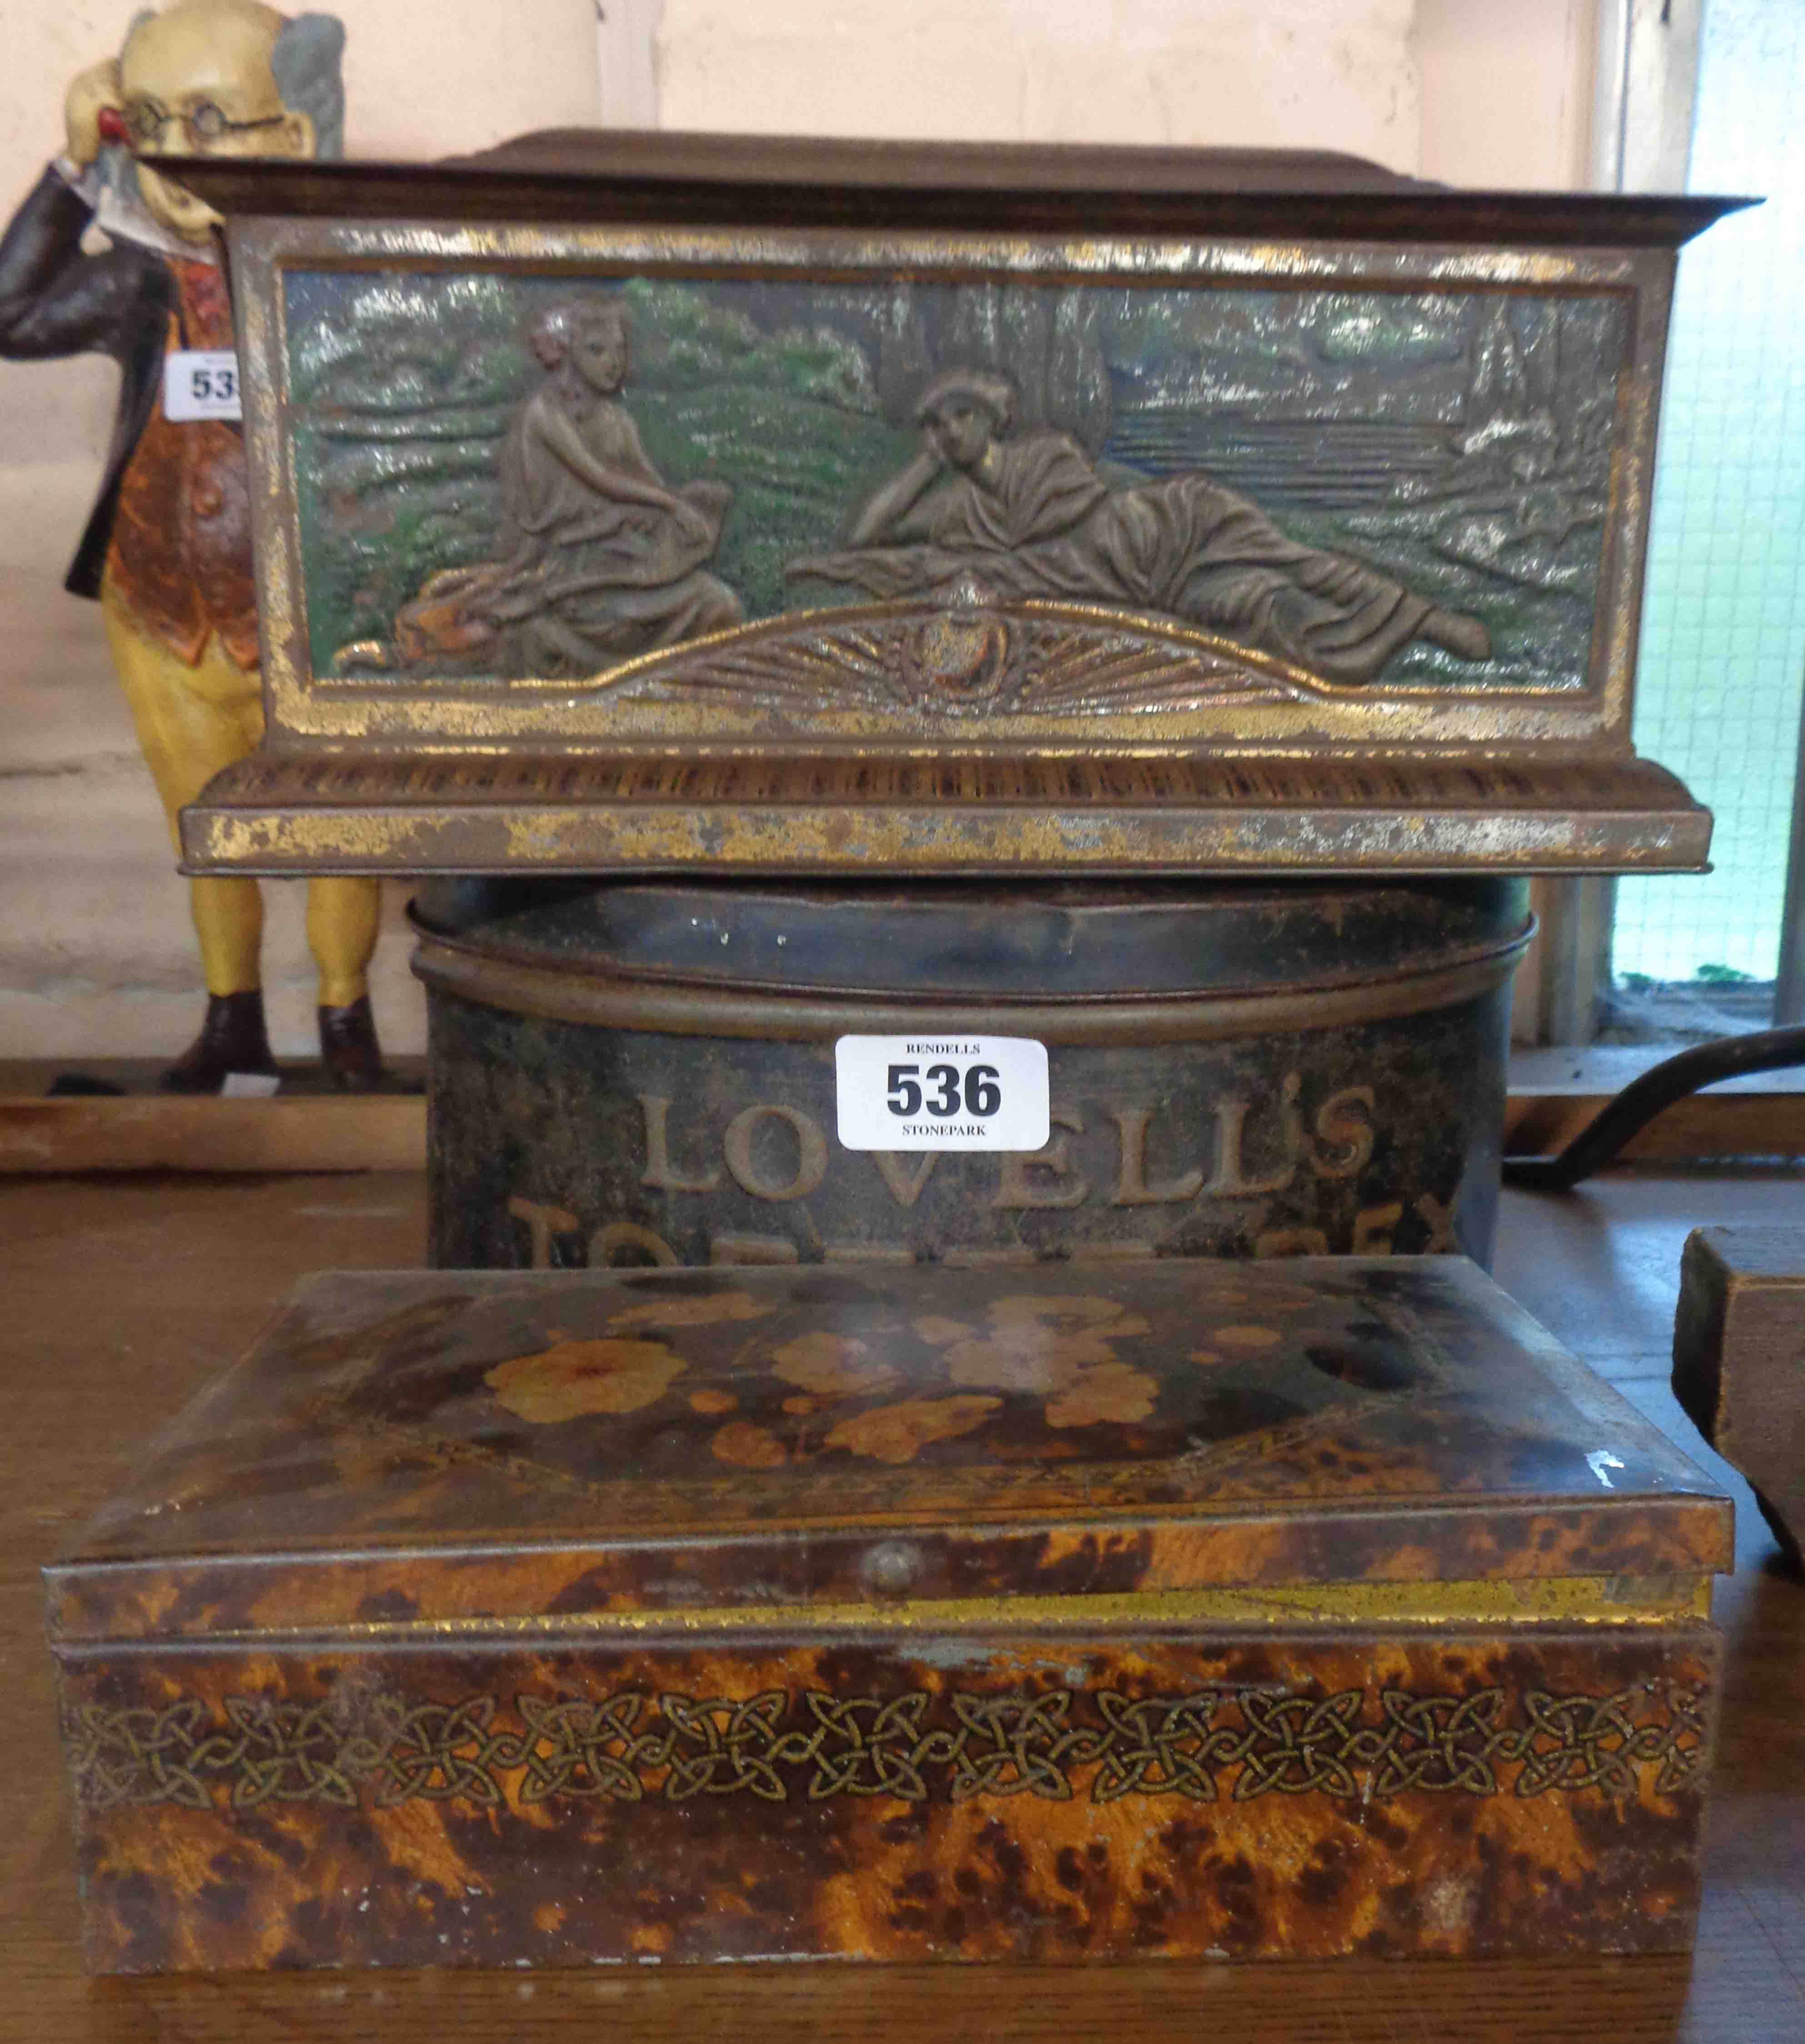 A vintage Lovells Coffee tin with decorative embossed sides - sold with a Colman tin and another